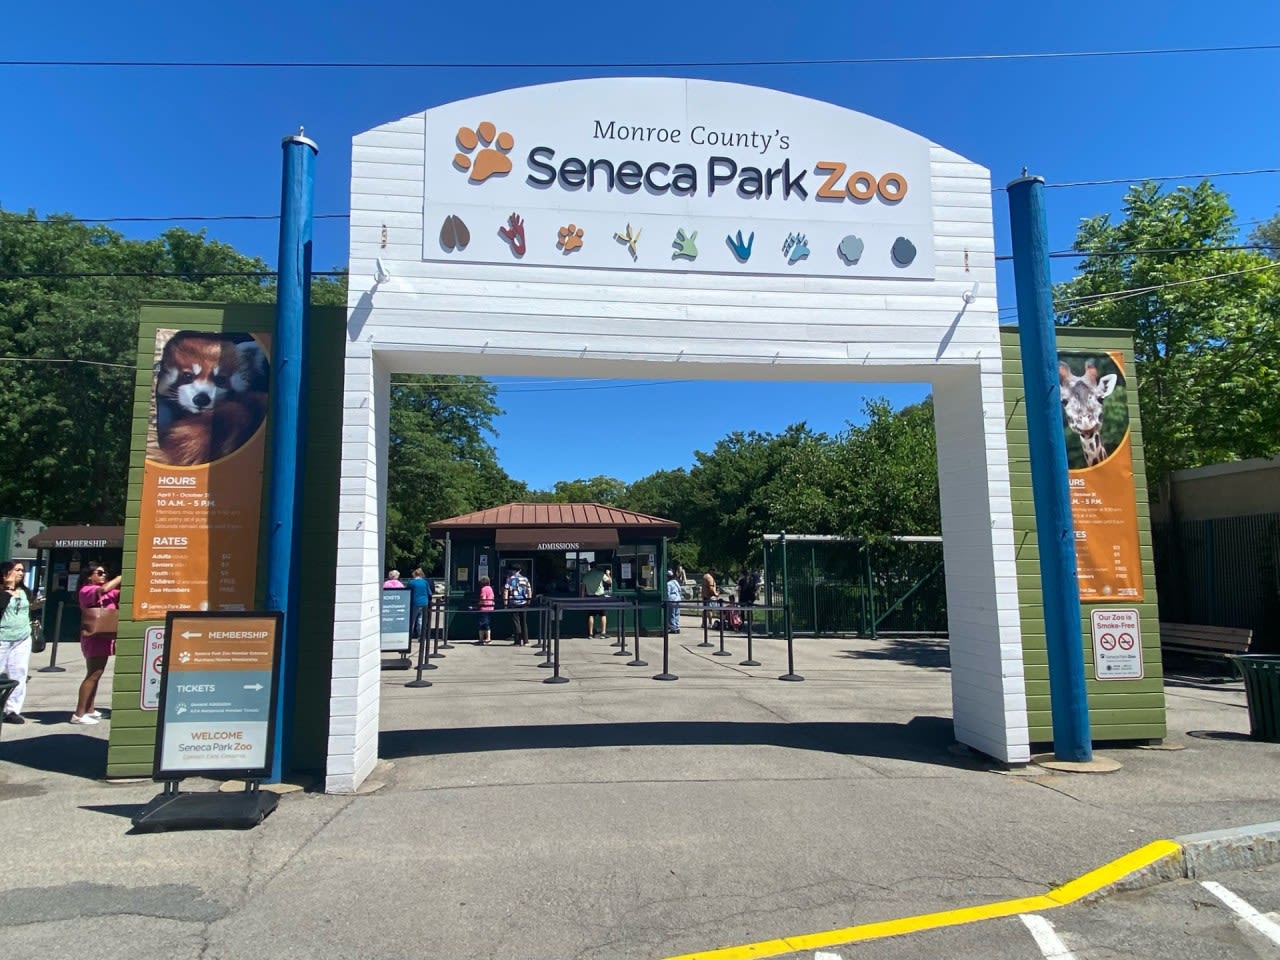 Seneca Park Zoo offering ‘Rise and Shine’ early morning tours